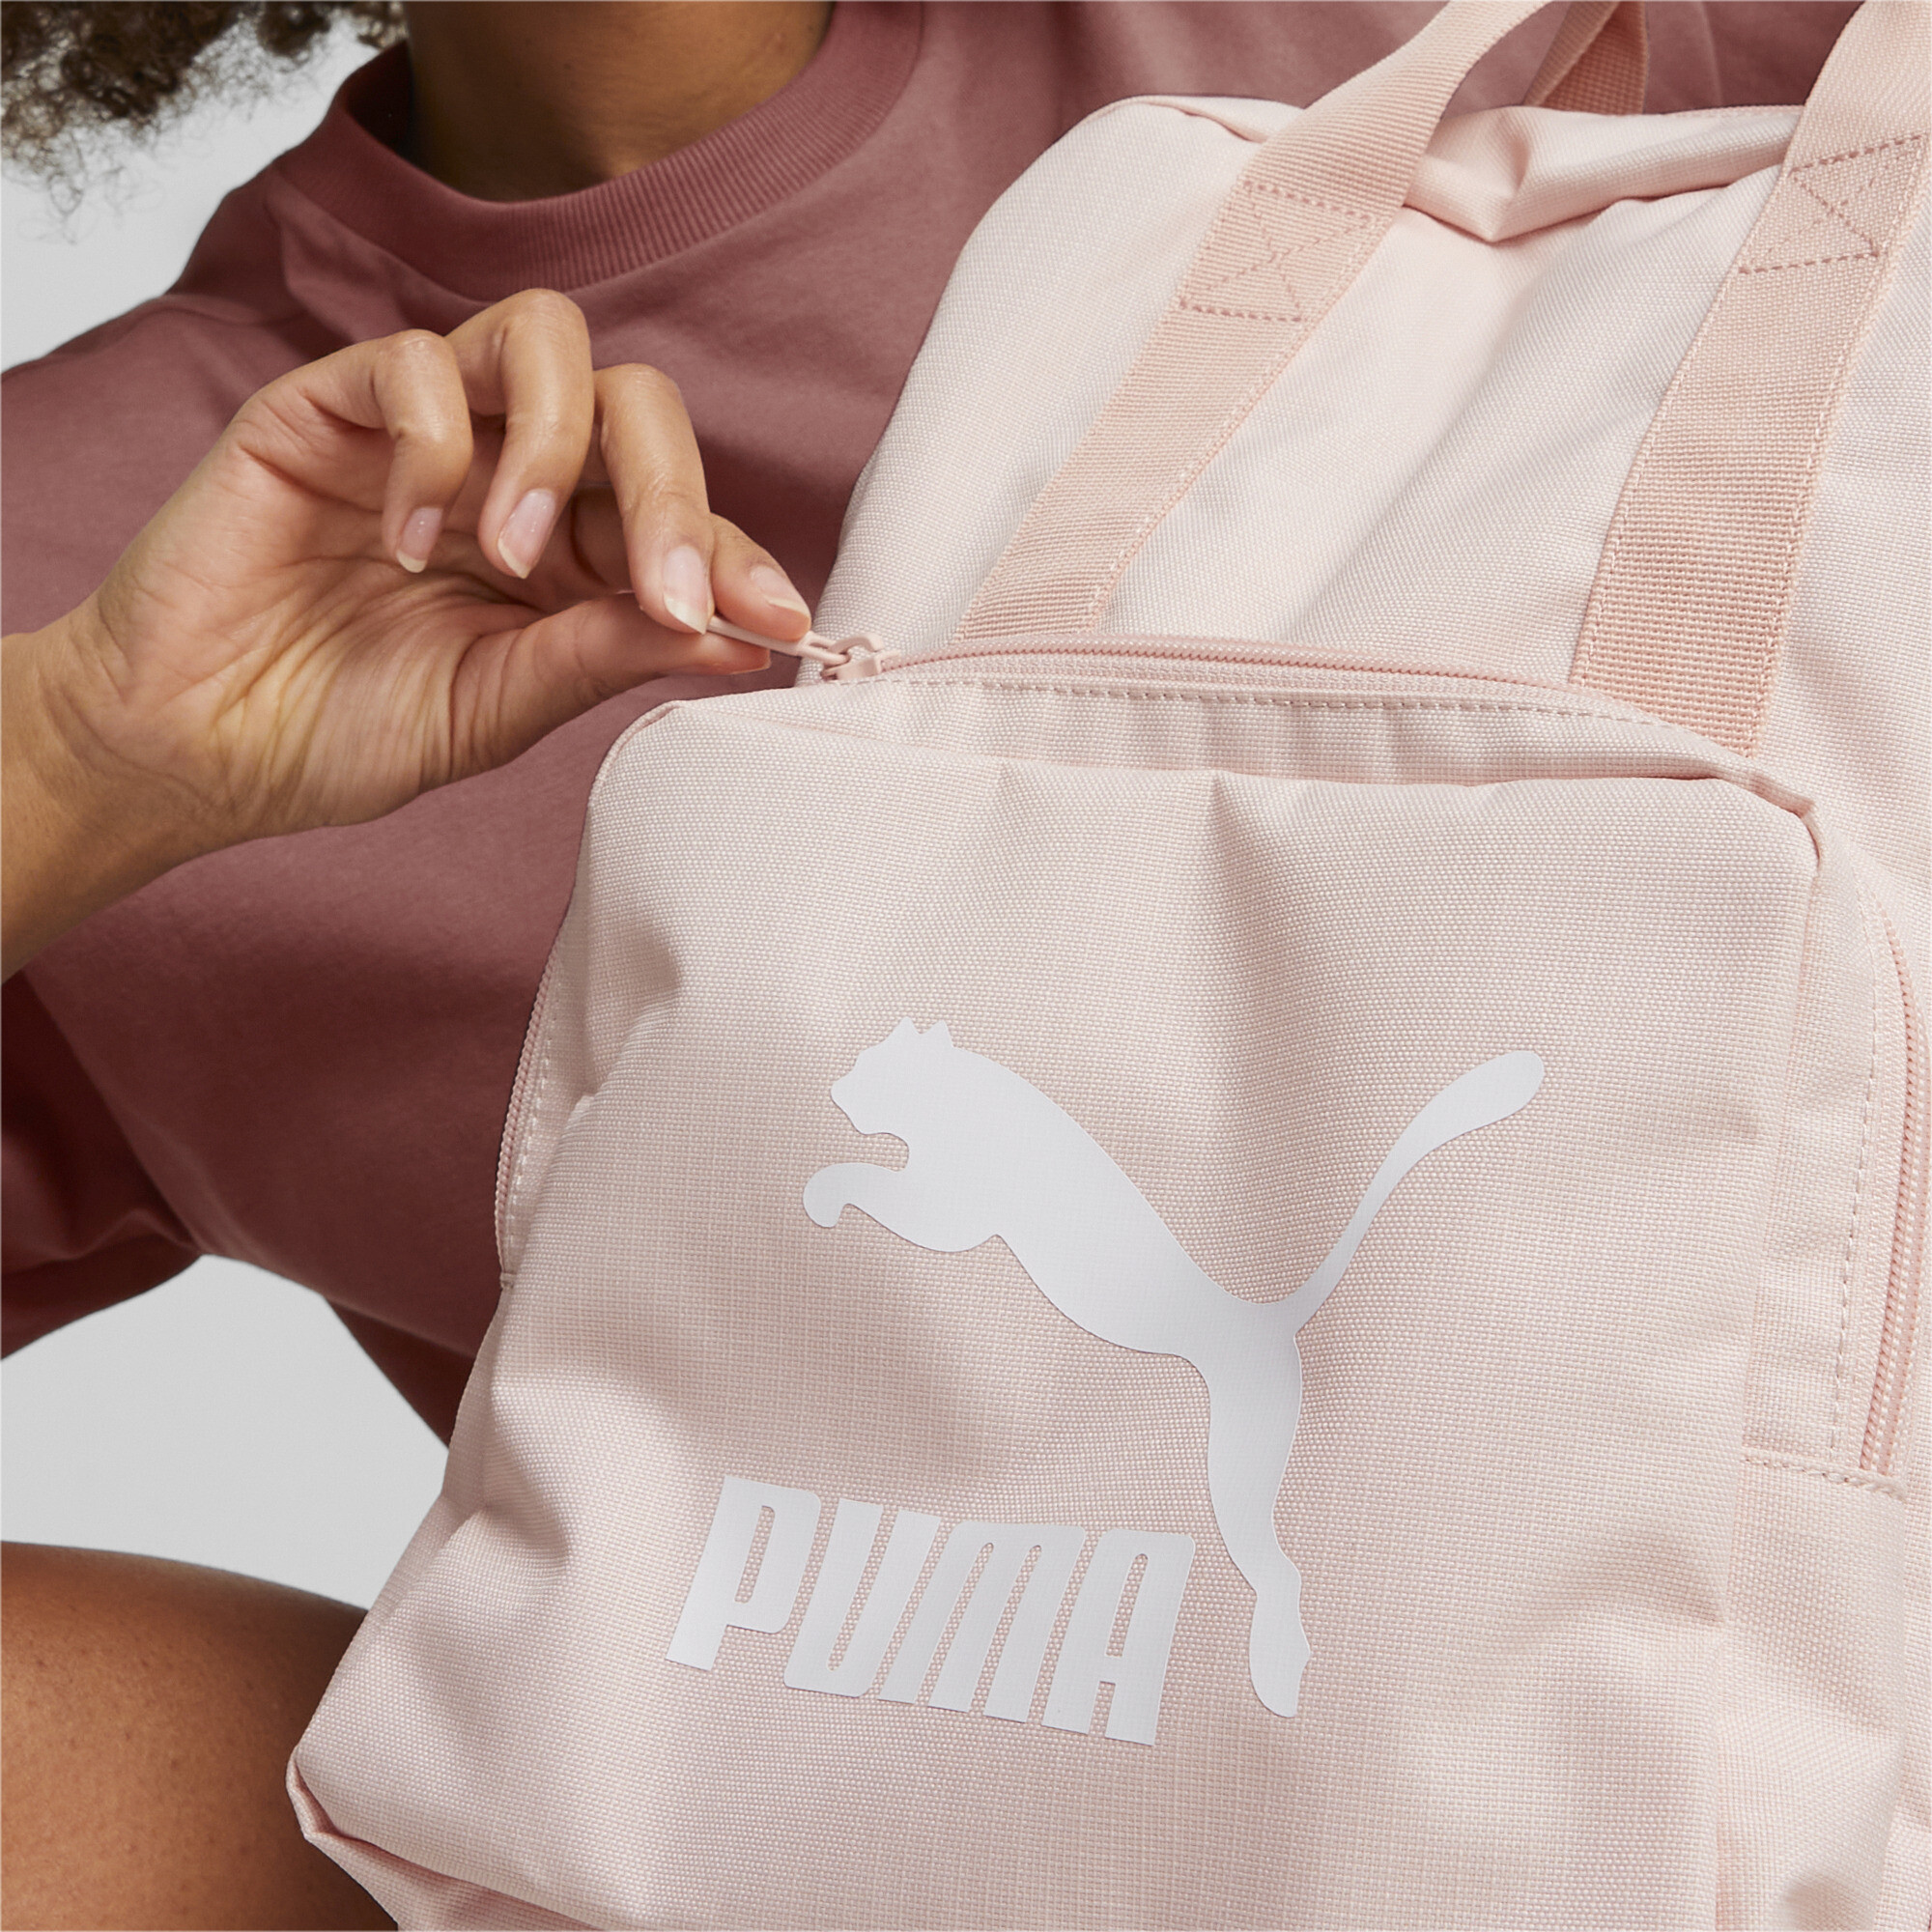 Men's PUMA Classics Archive Tote Backpack In Pink